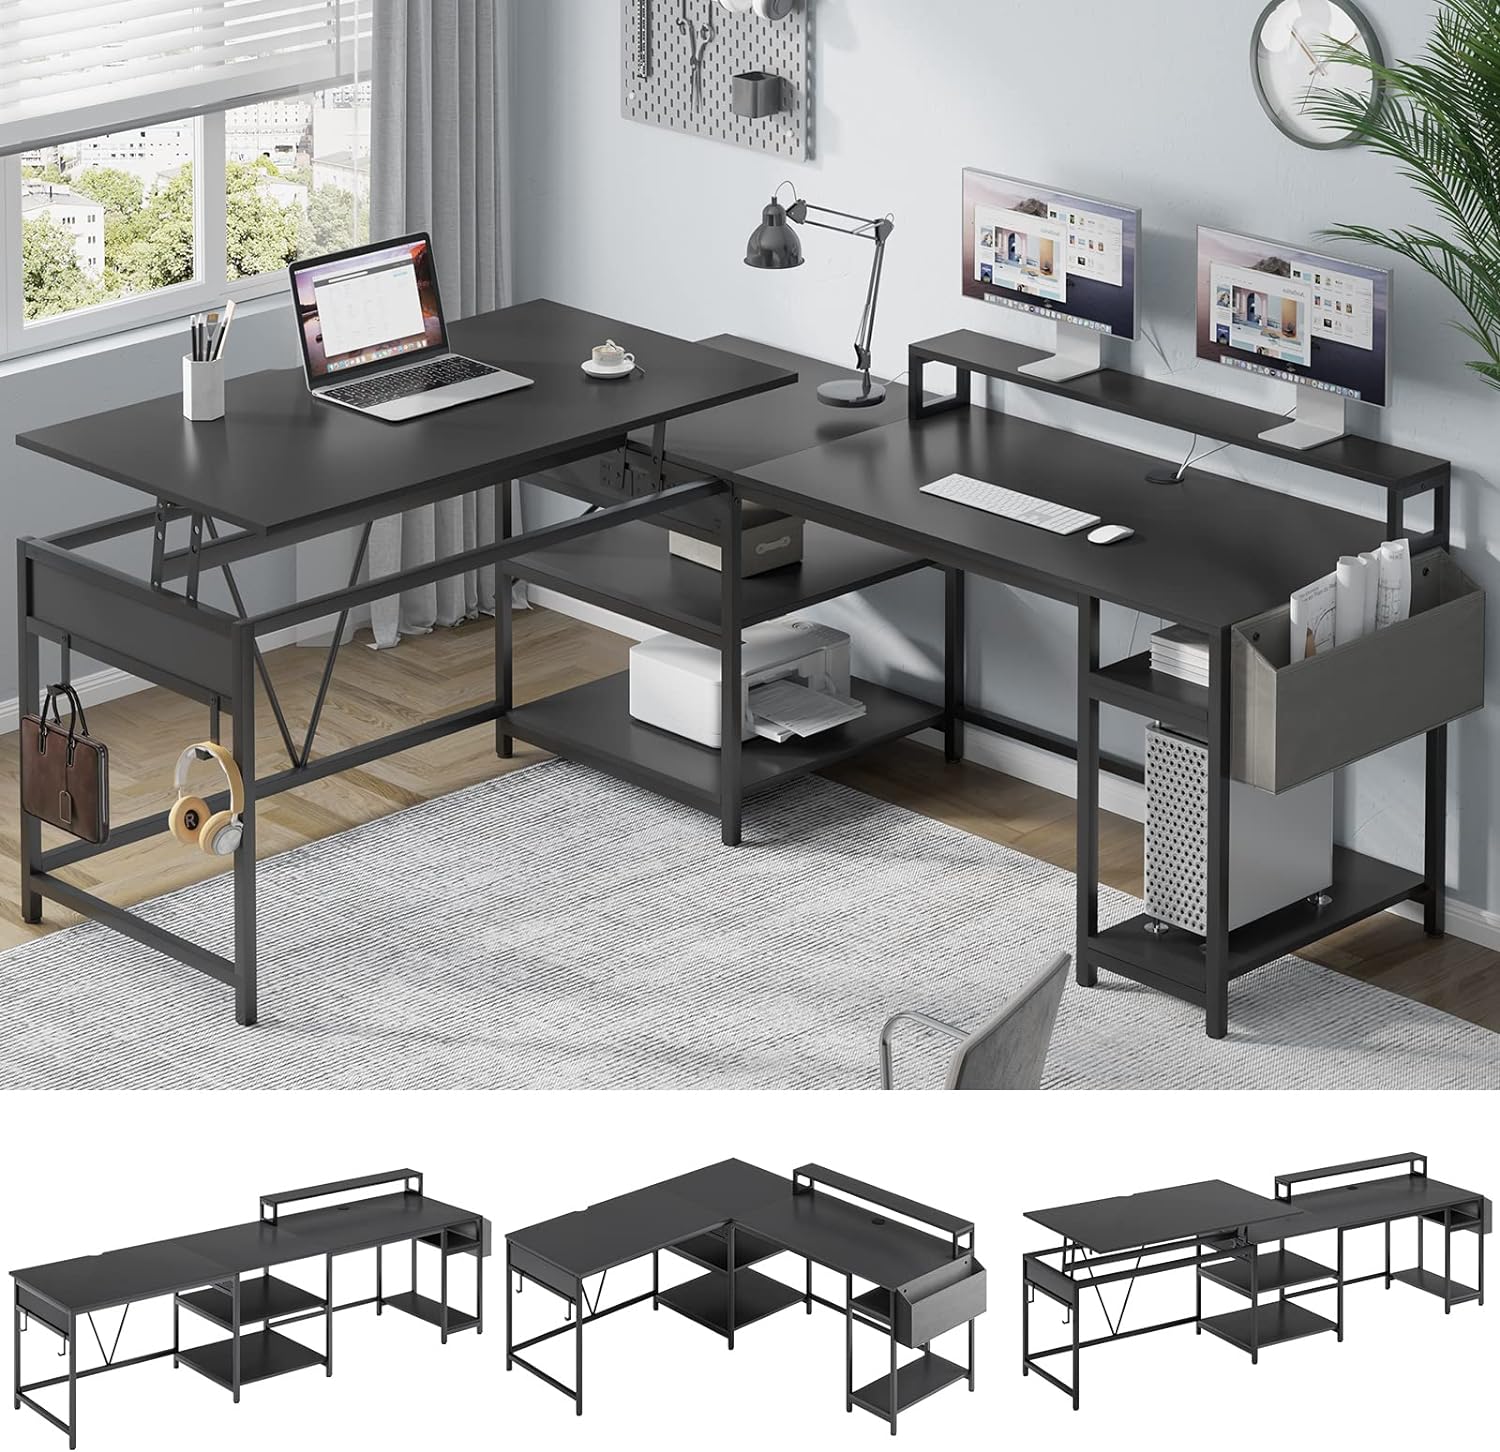 I work form home and have been looking for a desk where I have enough storage, looks good and also the best part that one side of the desk can be converted to a stand up desk. I am able to put my gym equipment at the bottom and work out. The quality of the desk is amazing and would recommend this to my peers. The instructions were easy to follow, however, the only issue I had on the instructions booklet it mainly shows how to set up a straight desk but I need it in the L shape and that part was 